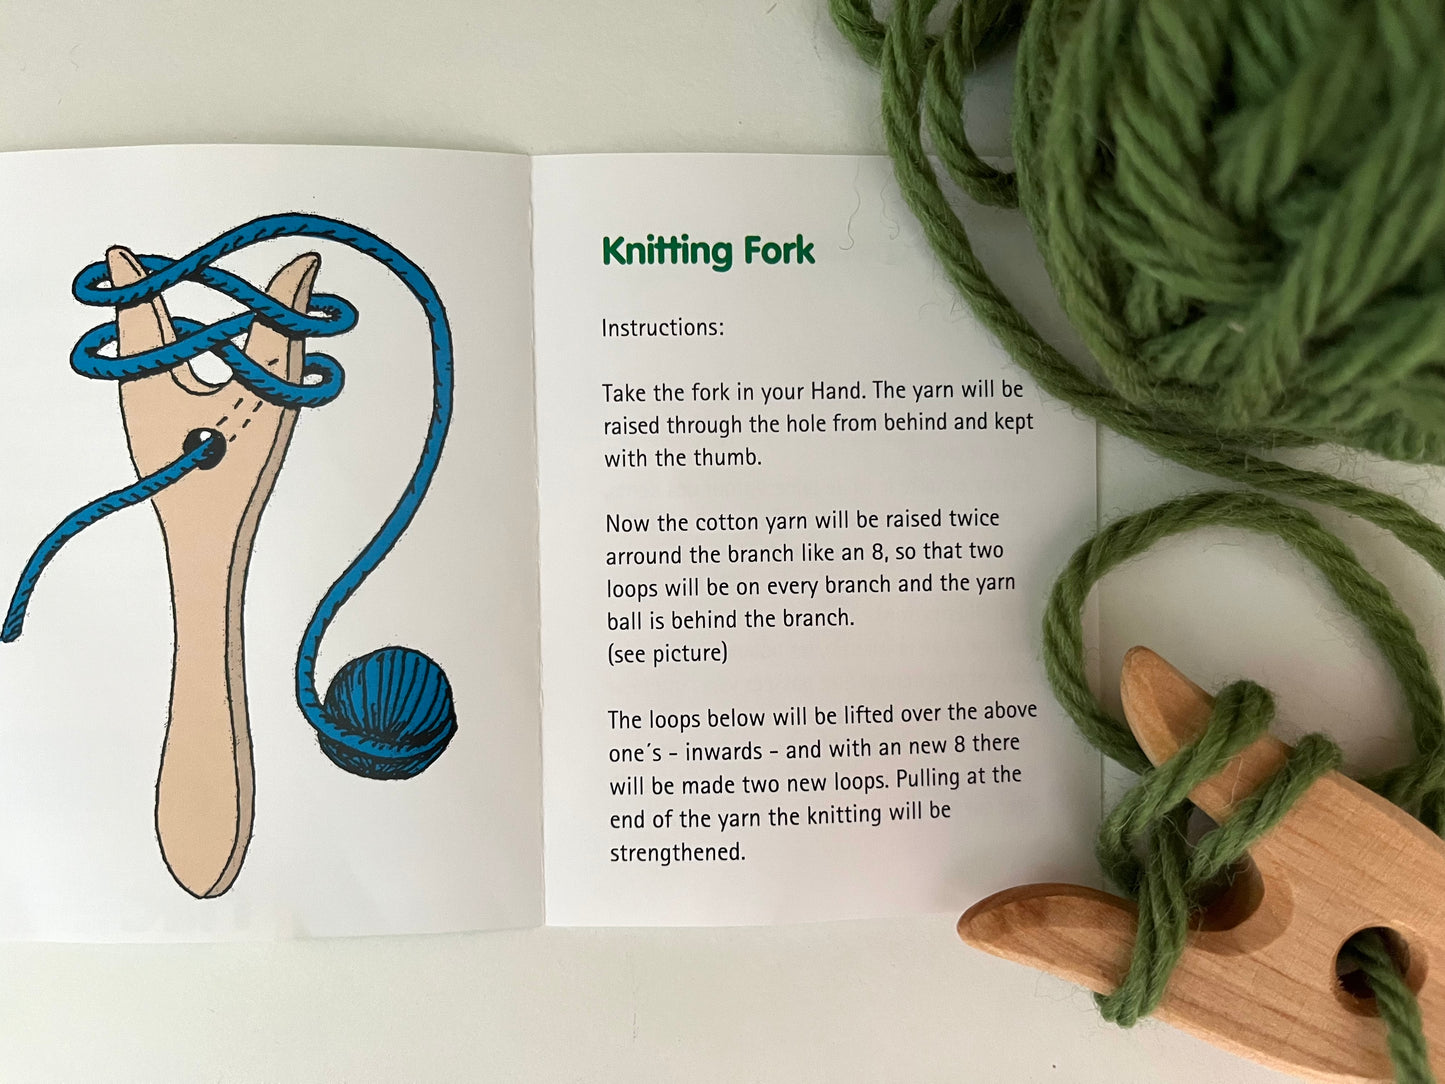 Crafting Tool - KNITTING FORK for wool ropes!